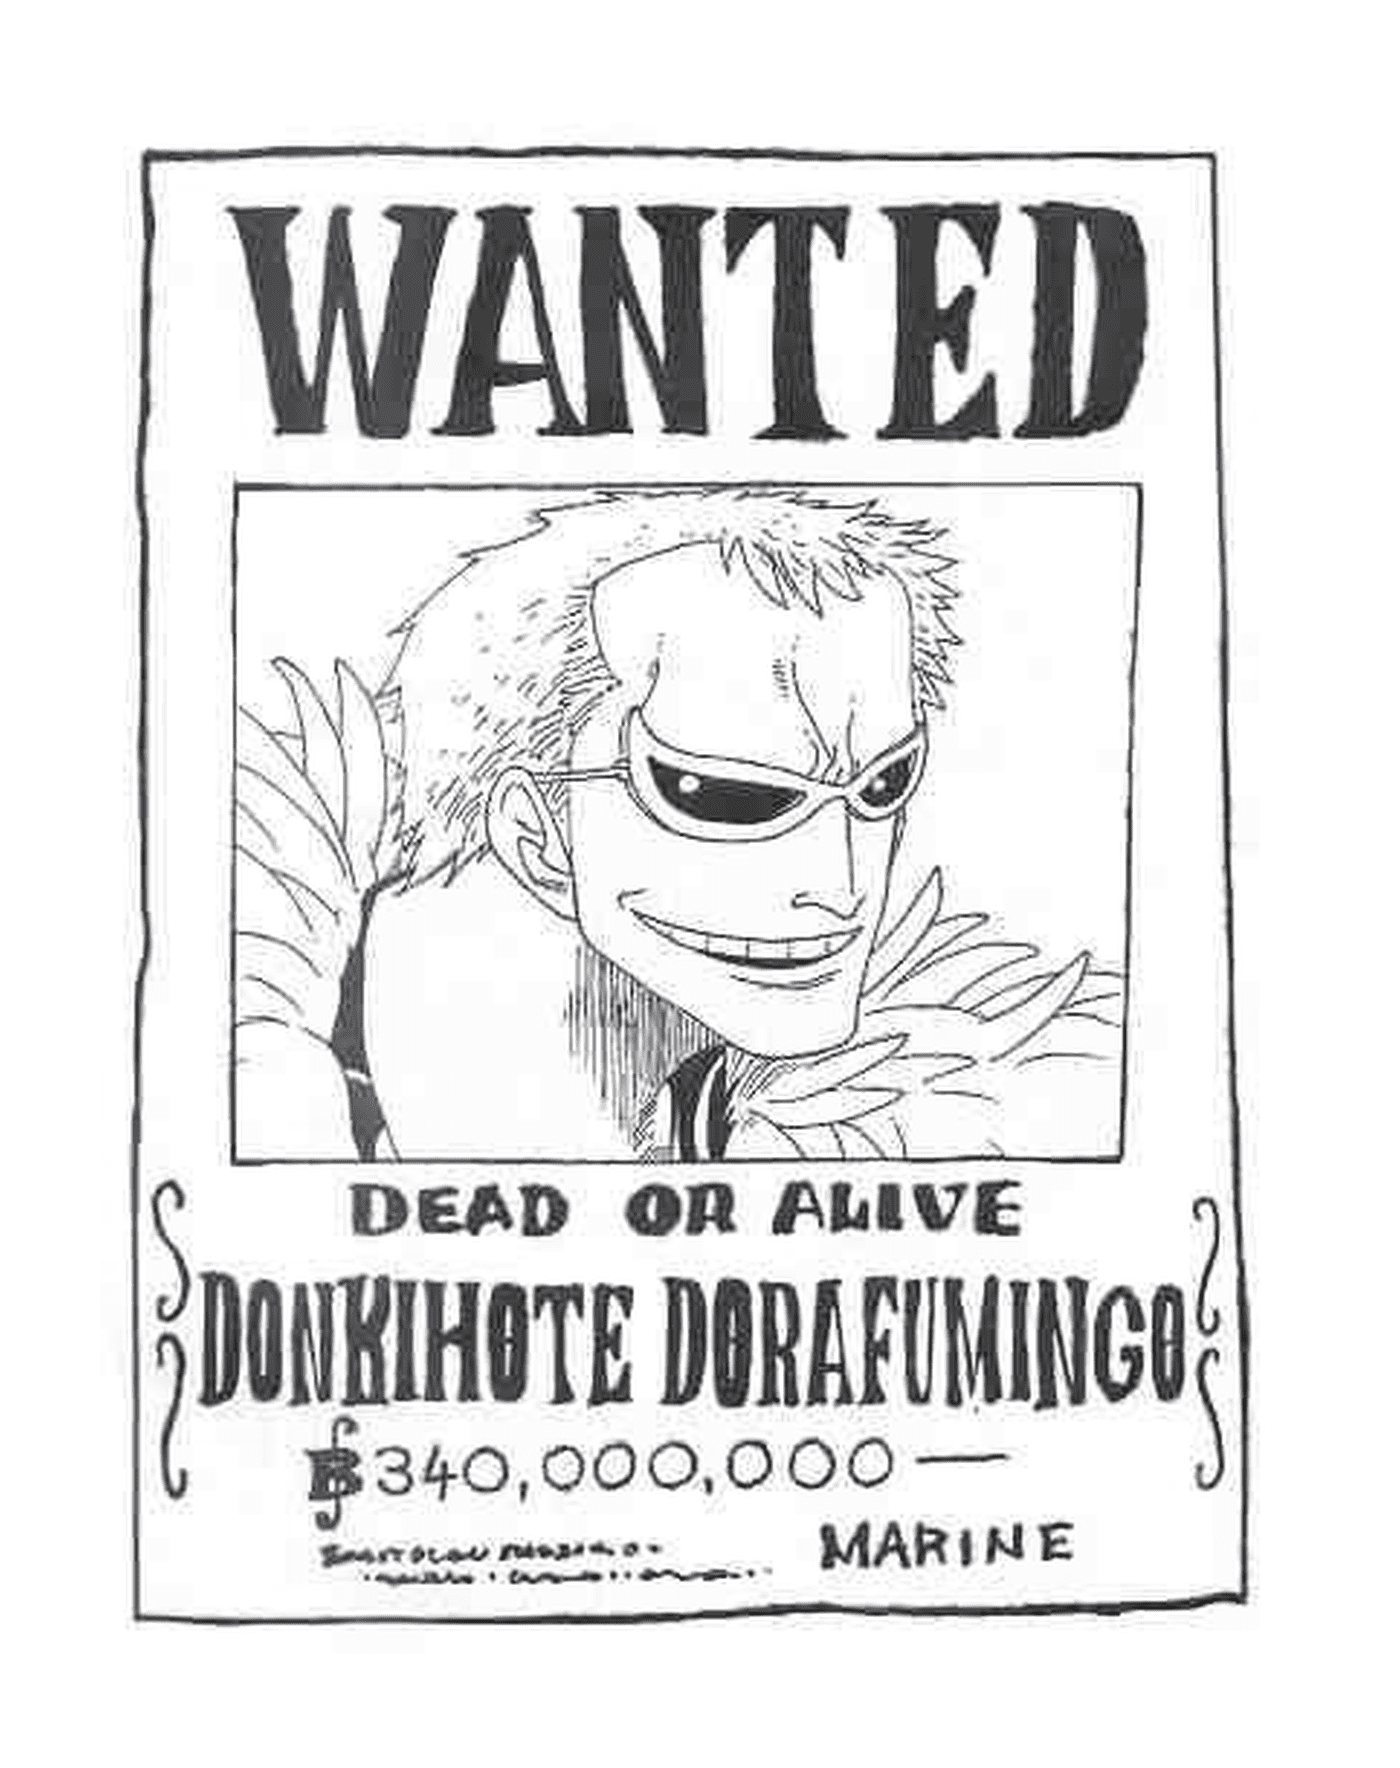  Wanted Donkihote Doflamingo, dead or alive 